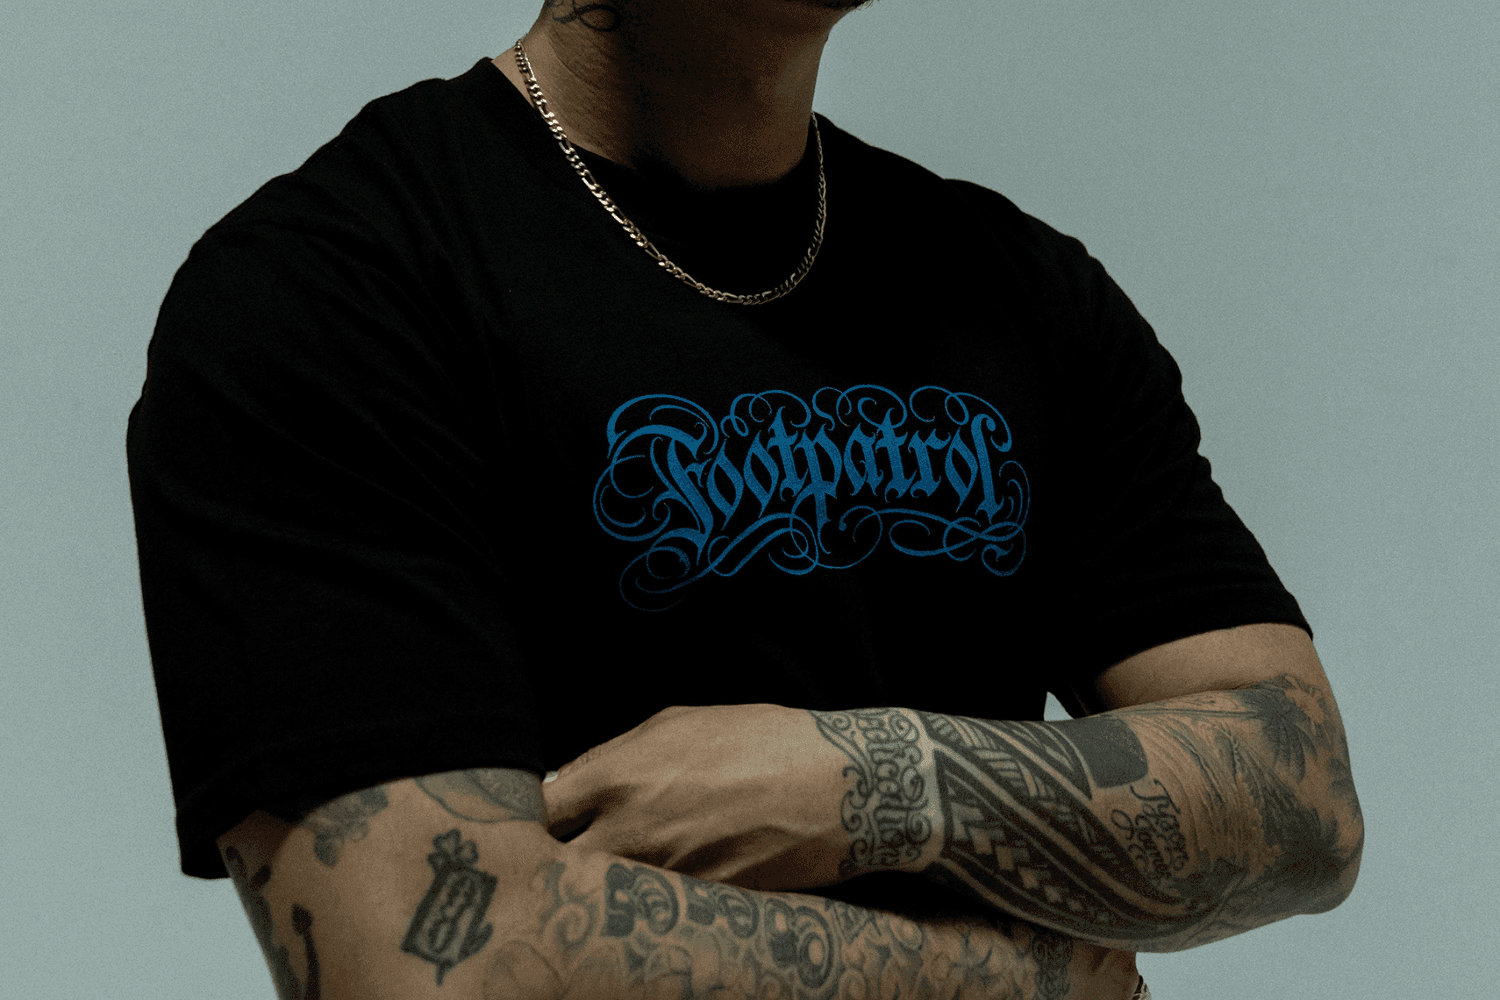 Tattoo artist Ken Carlos and Footpatrol come up with second collection